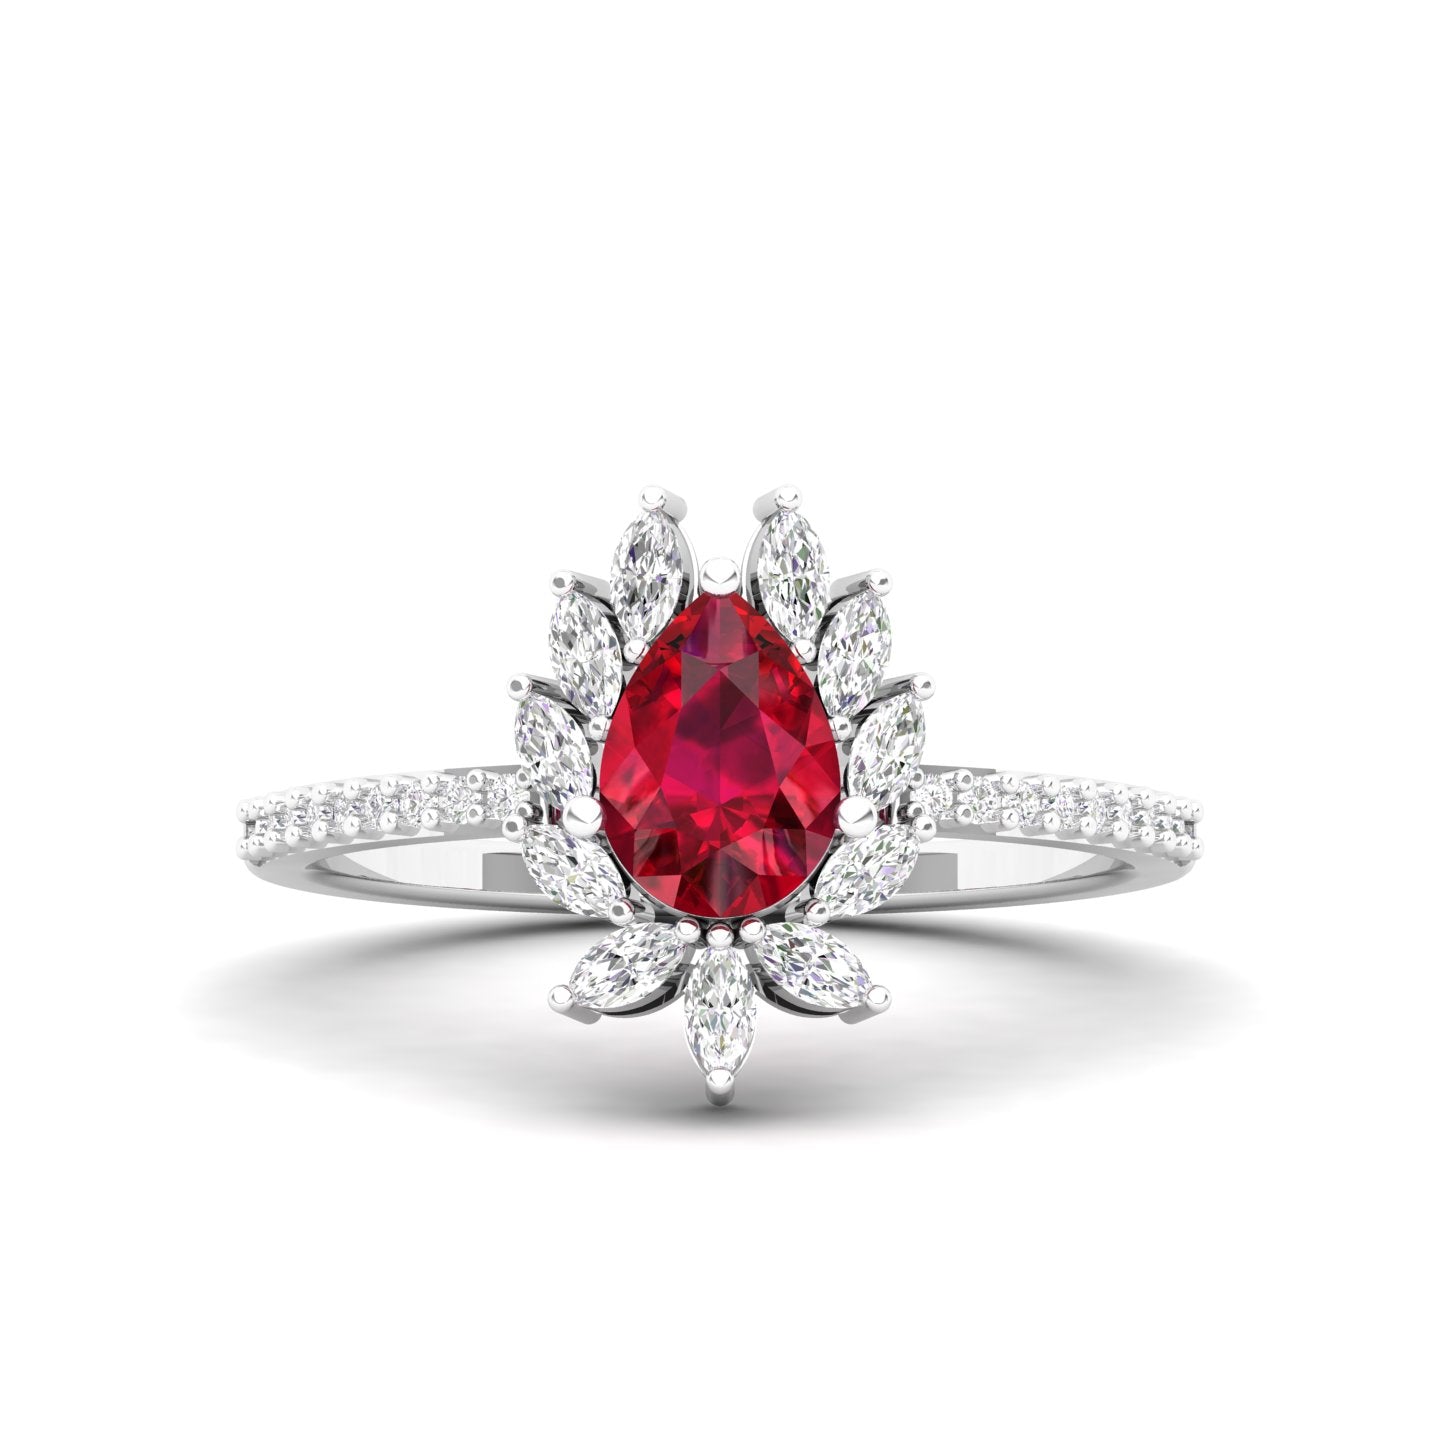 Maurya Solitaire Ruby Padma Engagement Ring with Diamond Halo